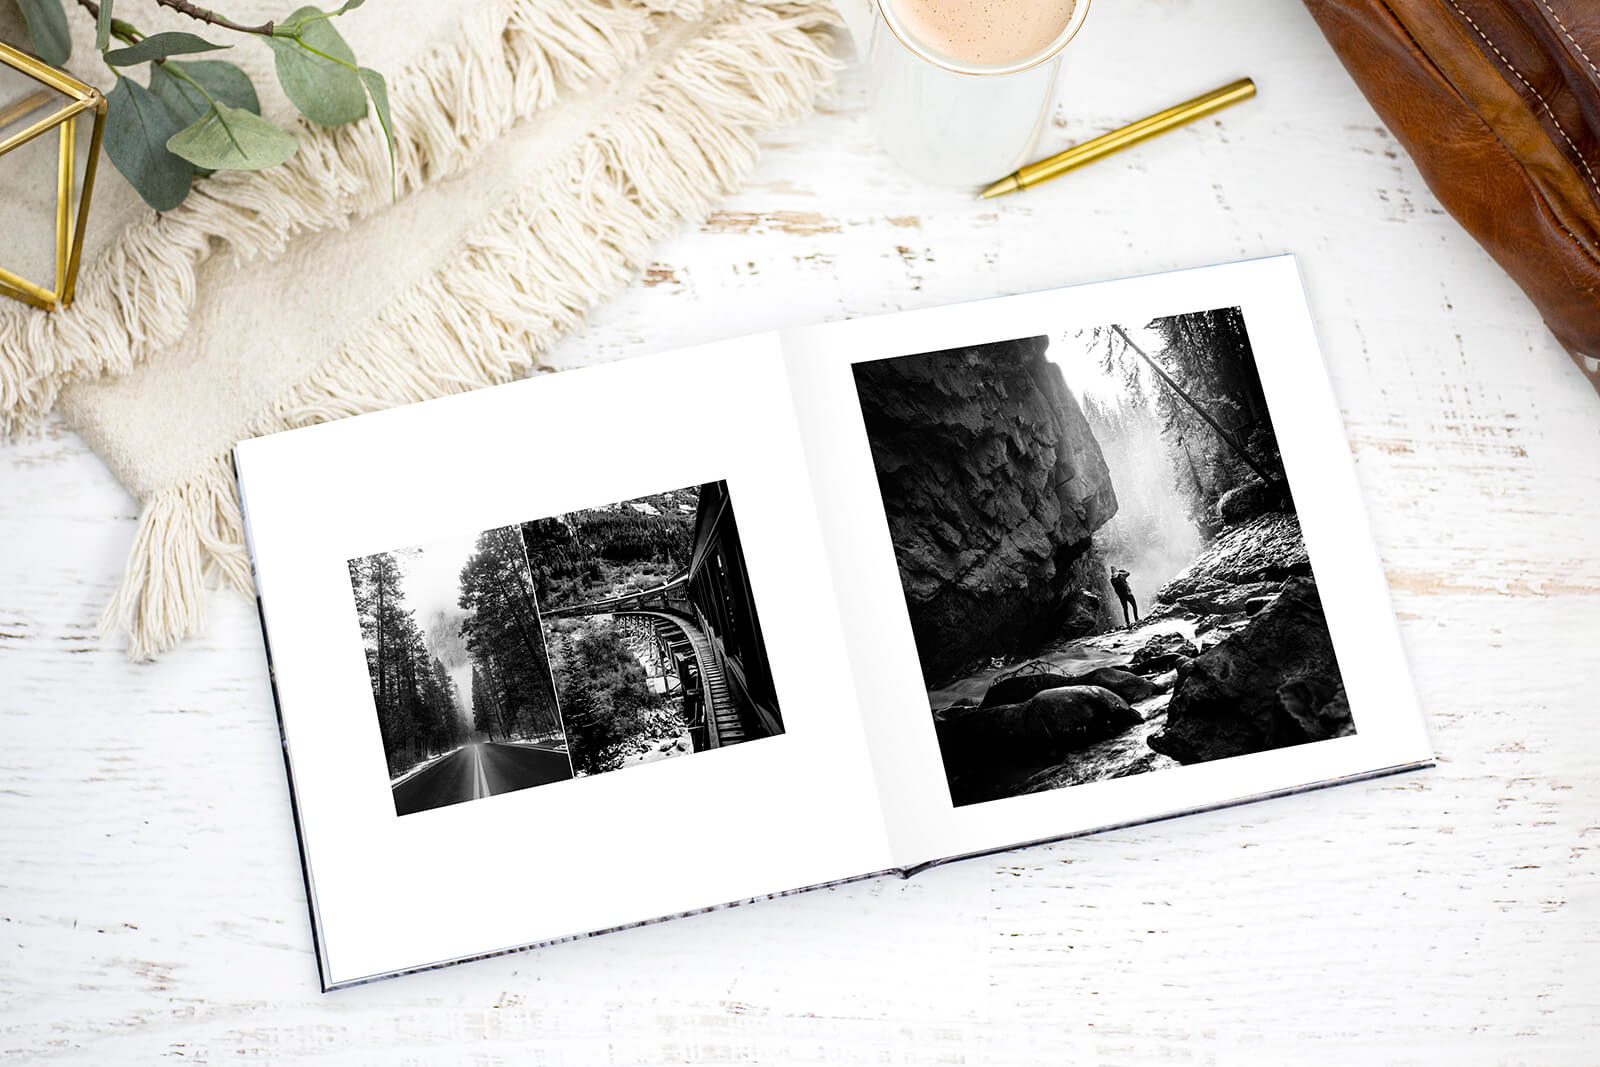 How to Choose the Best Paper for Your Photo Books